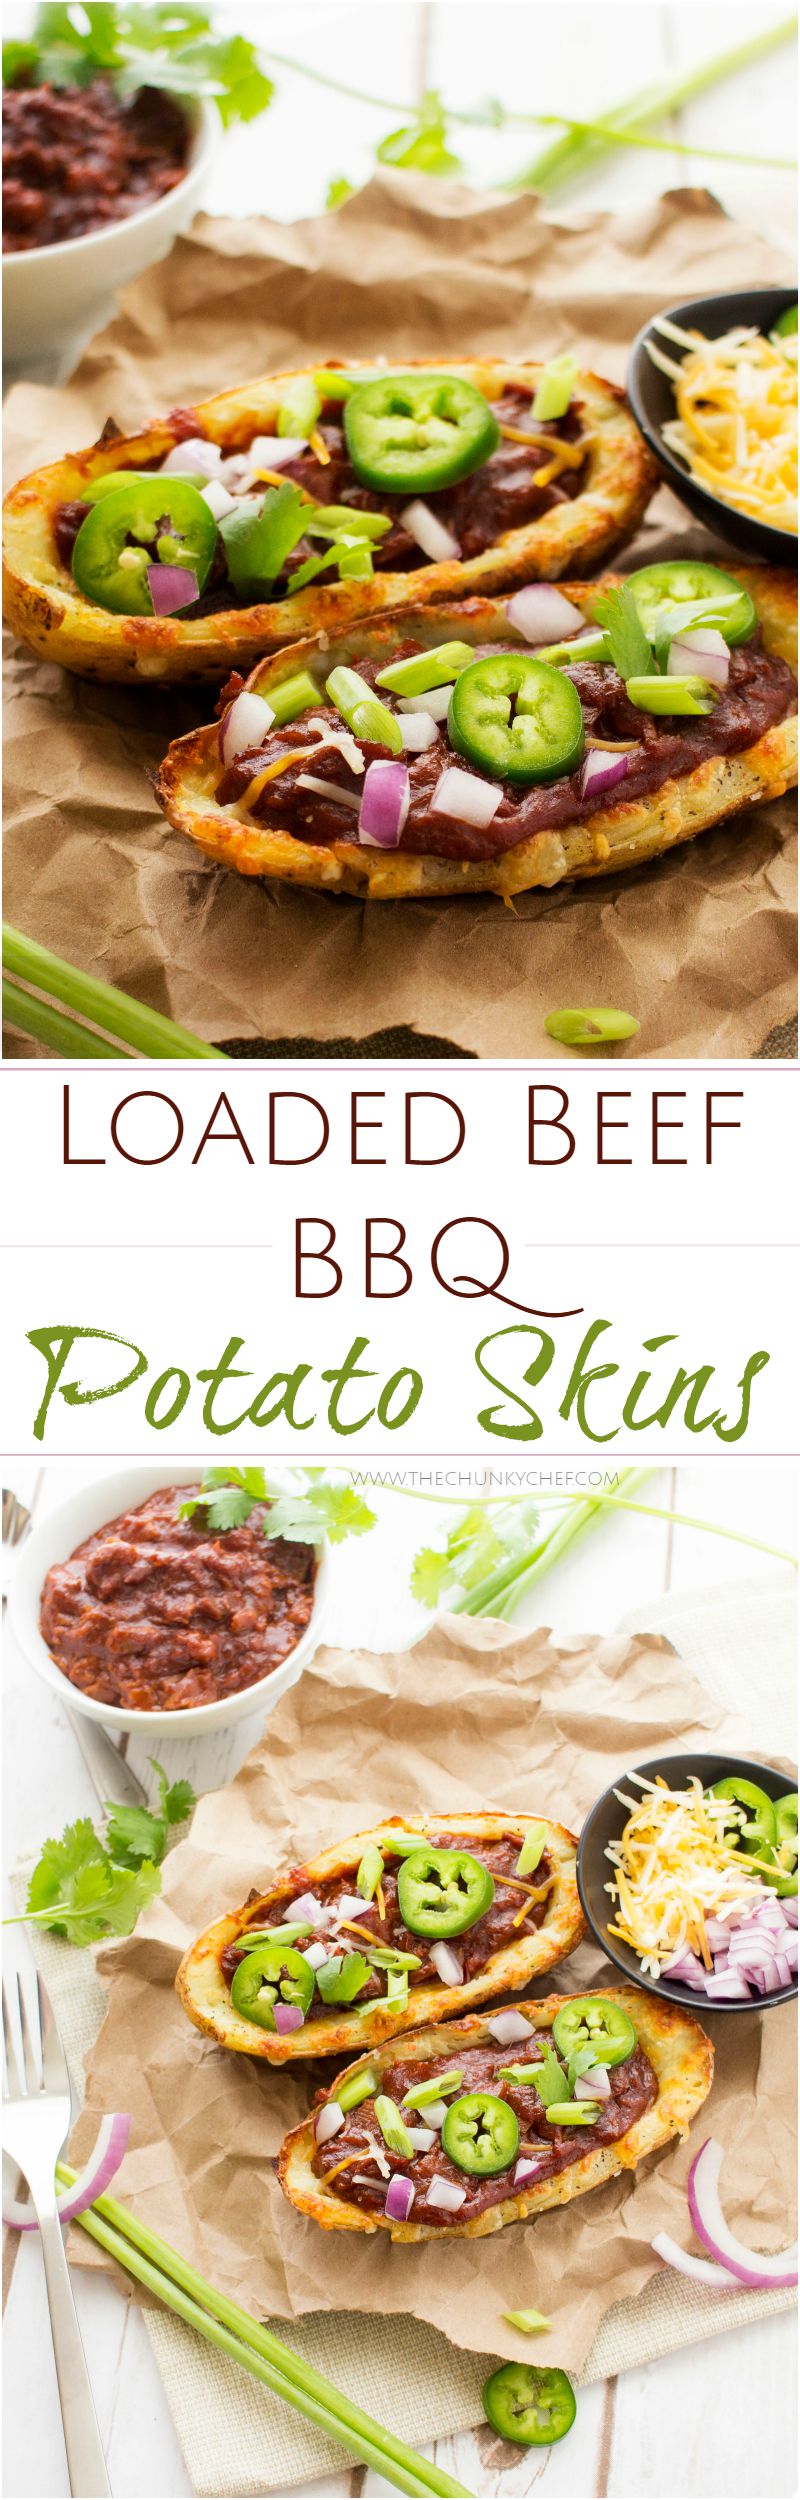 Loaded Beef BBQ Potato Skins | The Chunky Chef | The classic potato skins appetizer gets a BBQ twist! Chipotle beef BBQ on top of crispy and cheesy potato skins - perfect for game day or a great snack!